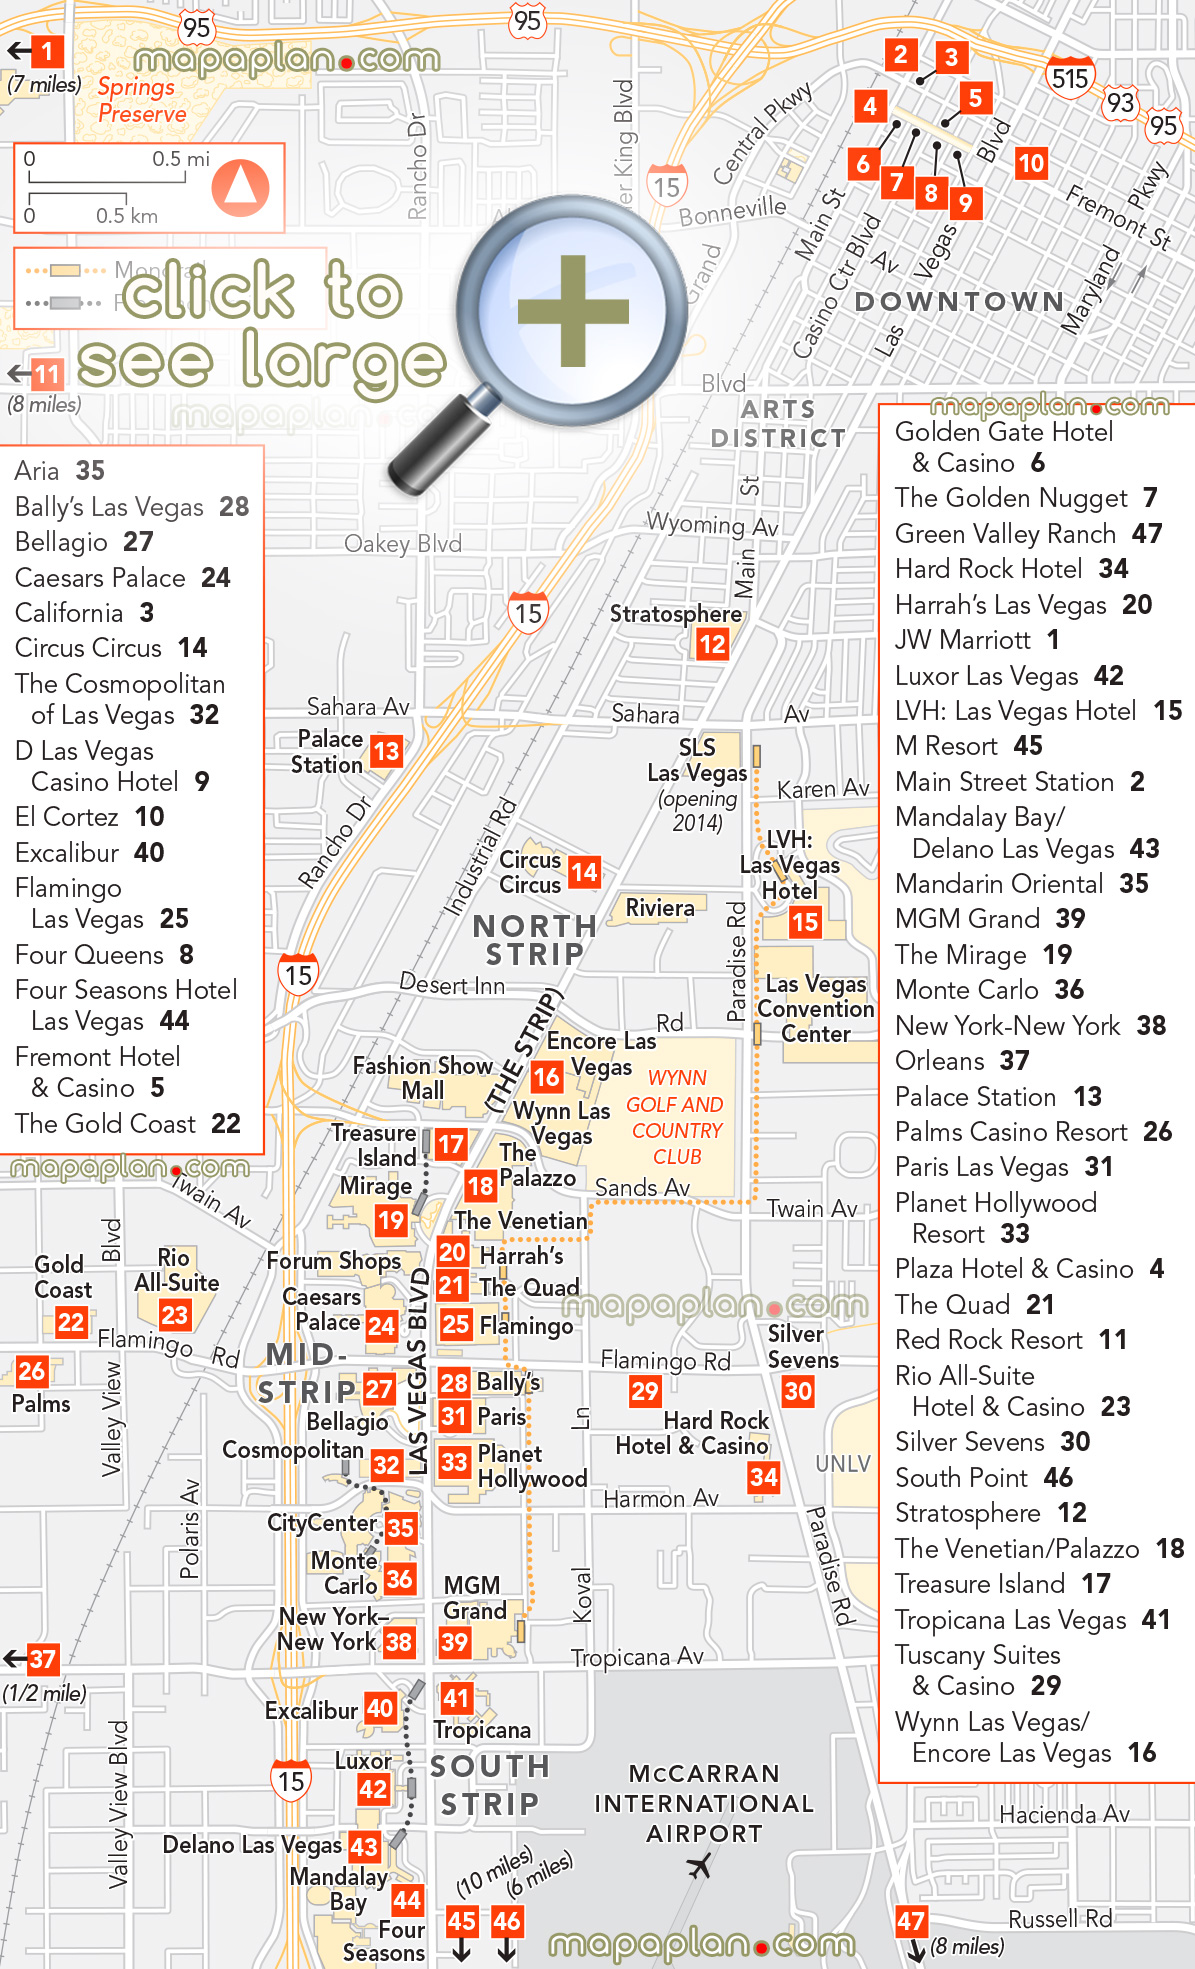 tuscany suites las vegas map Las Vegas Map A Z List Of All Hotels On The Strip Including Aria tuscany suites las vegas map